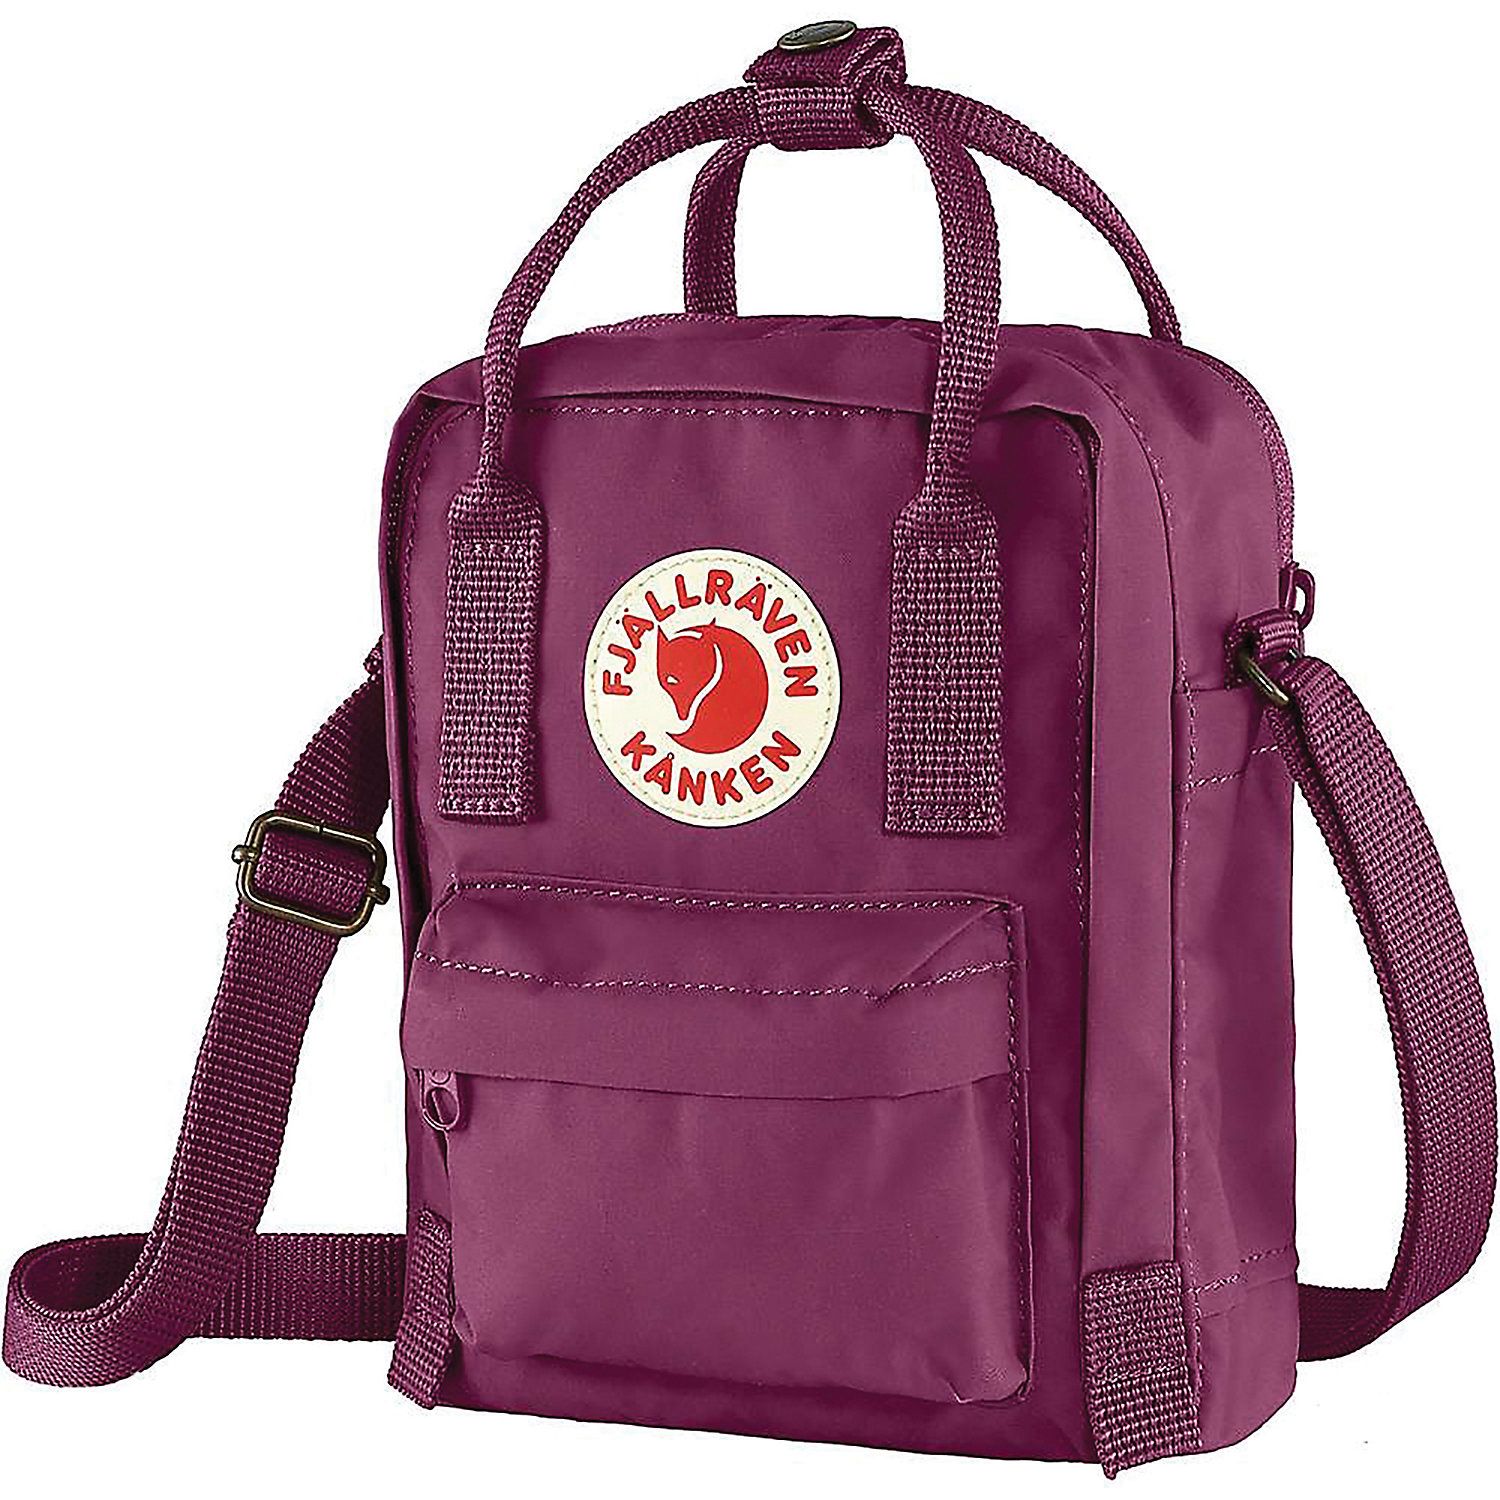 Photos - Other Bags & Accessories FjallRaven Kanken Sling Pack, Men's, Royal Purple | Father's Day Gift Idea 